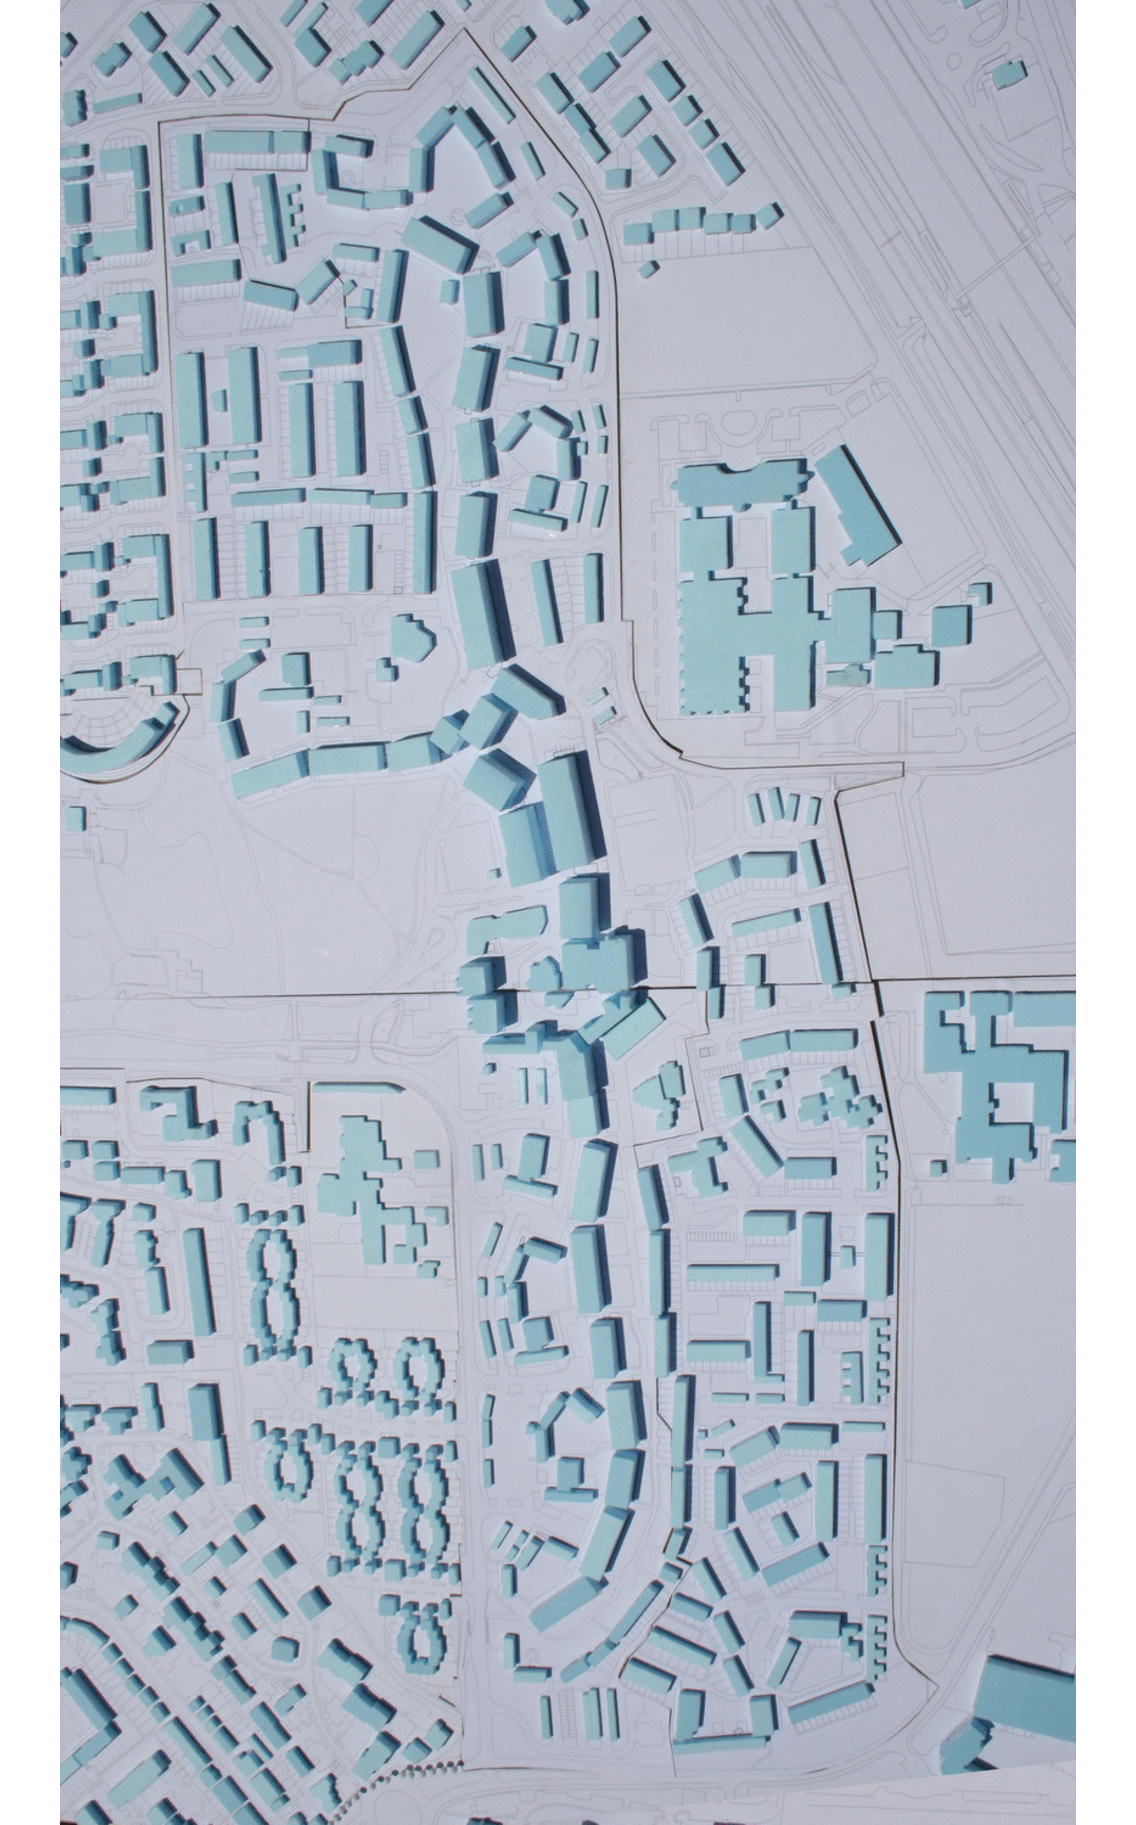 Grahame Park Masterplan Before and After.gif